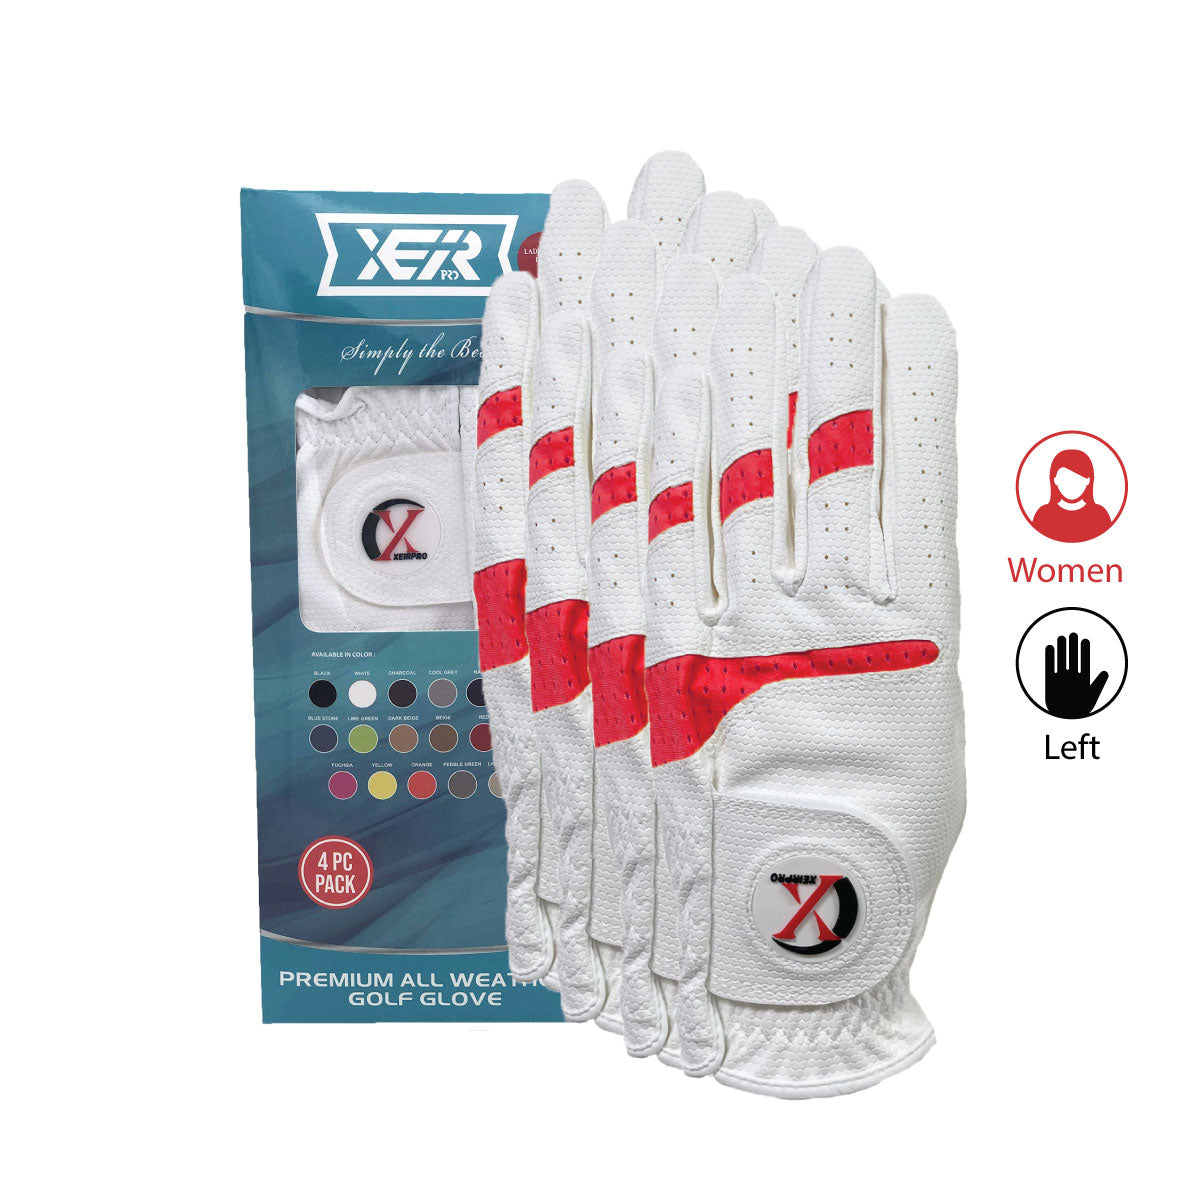 XEIR PRO Premium All Weather Golf Gloves 4 Pack for Women Worn On Left Hand for Right Handed Golfer